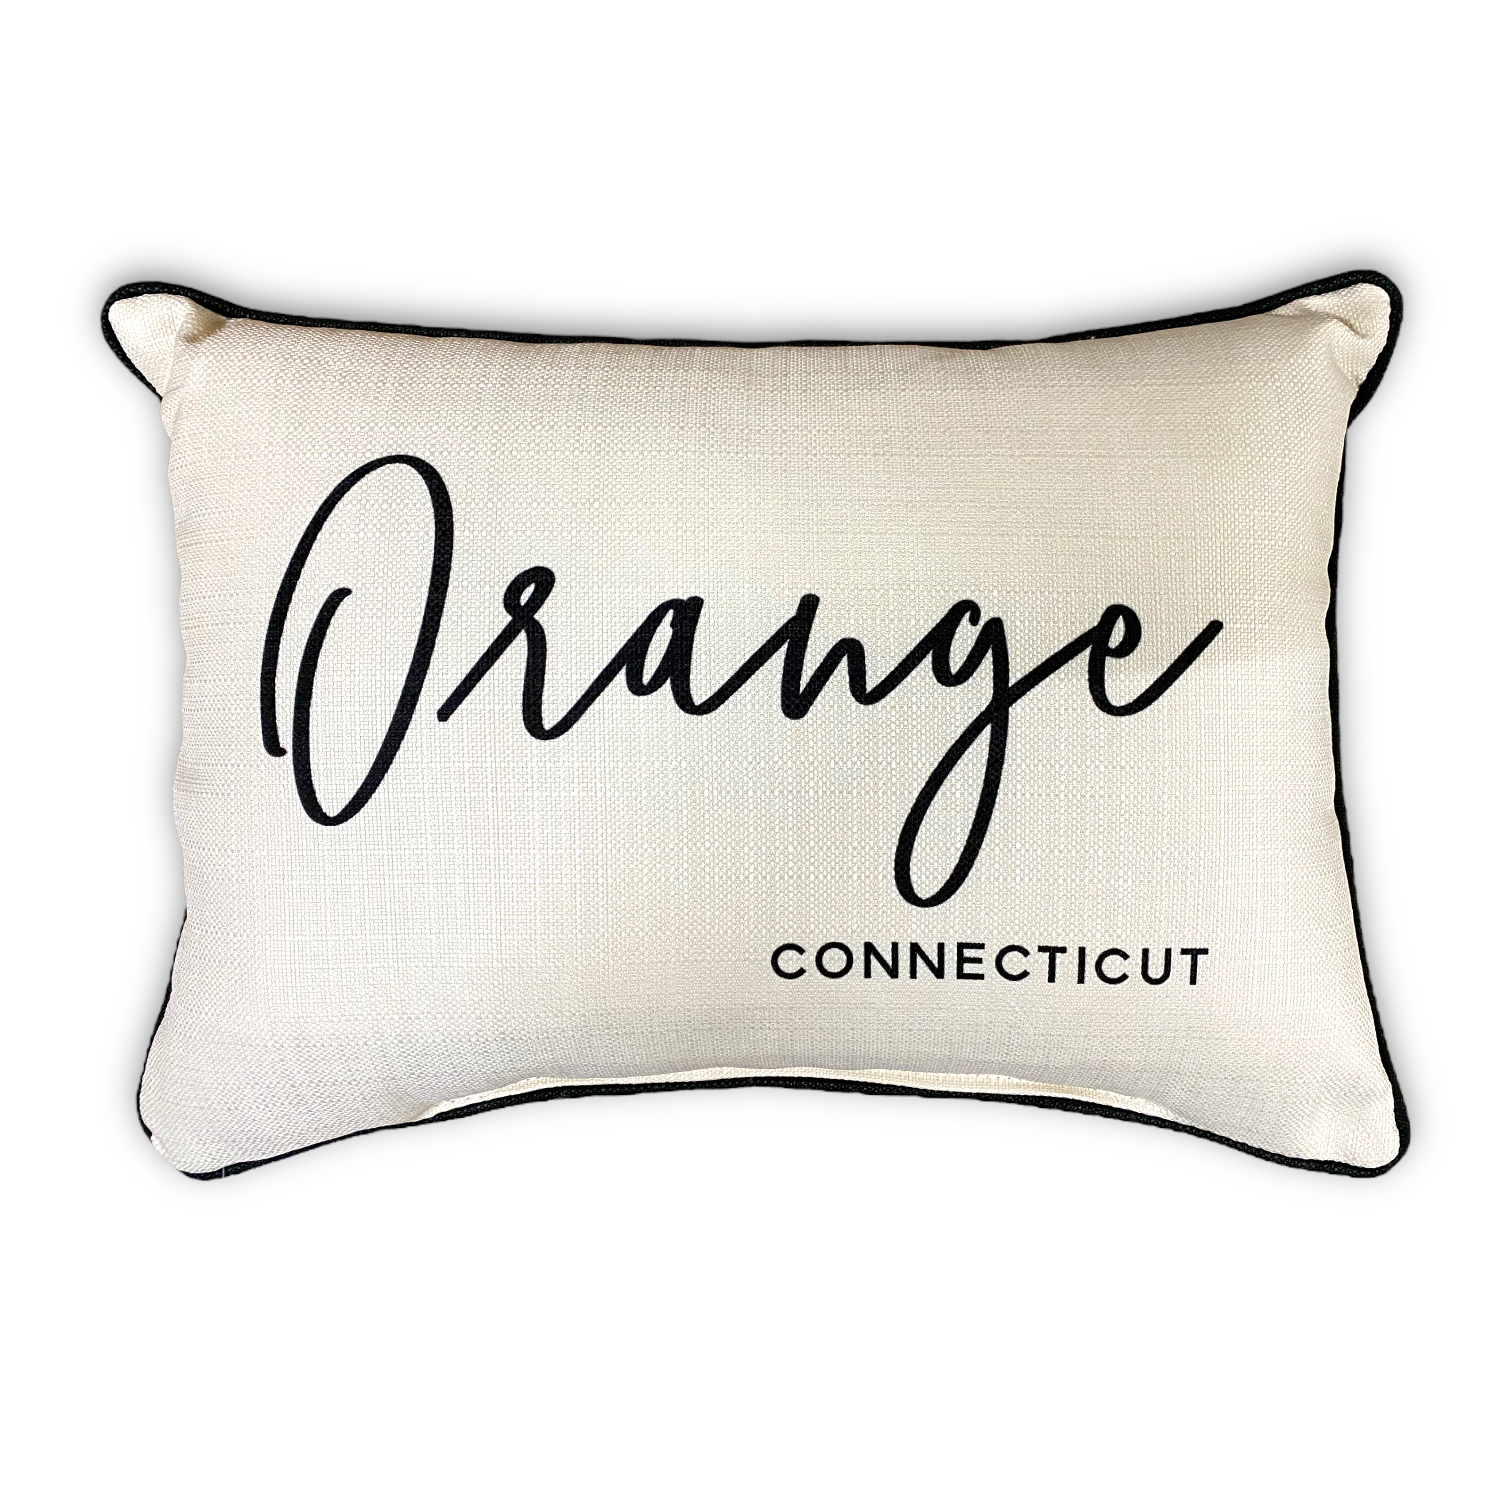 Orange Connecticut Throw Pillow with Pinot Script and Black Piping